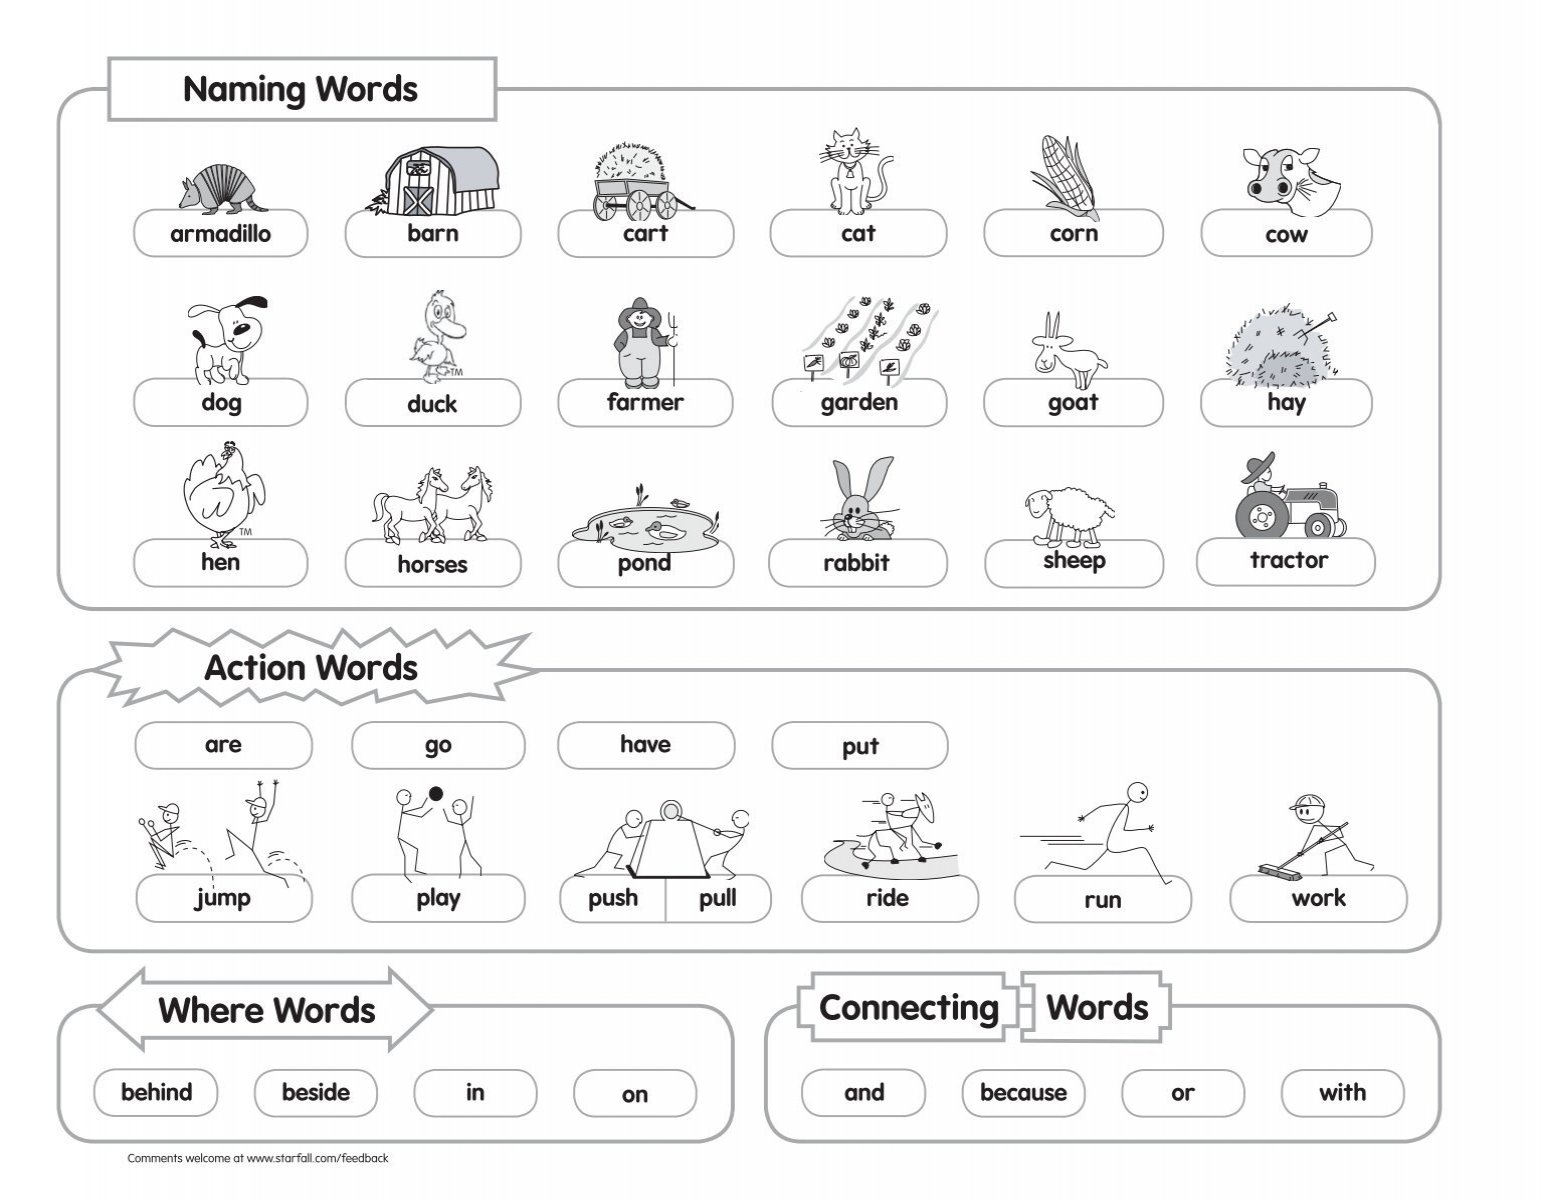 naming-words-action-words-where-words-words-connecting